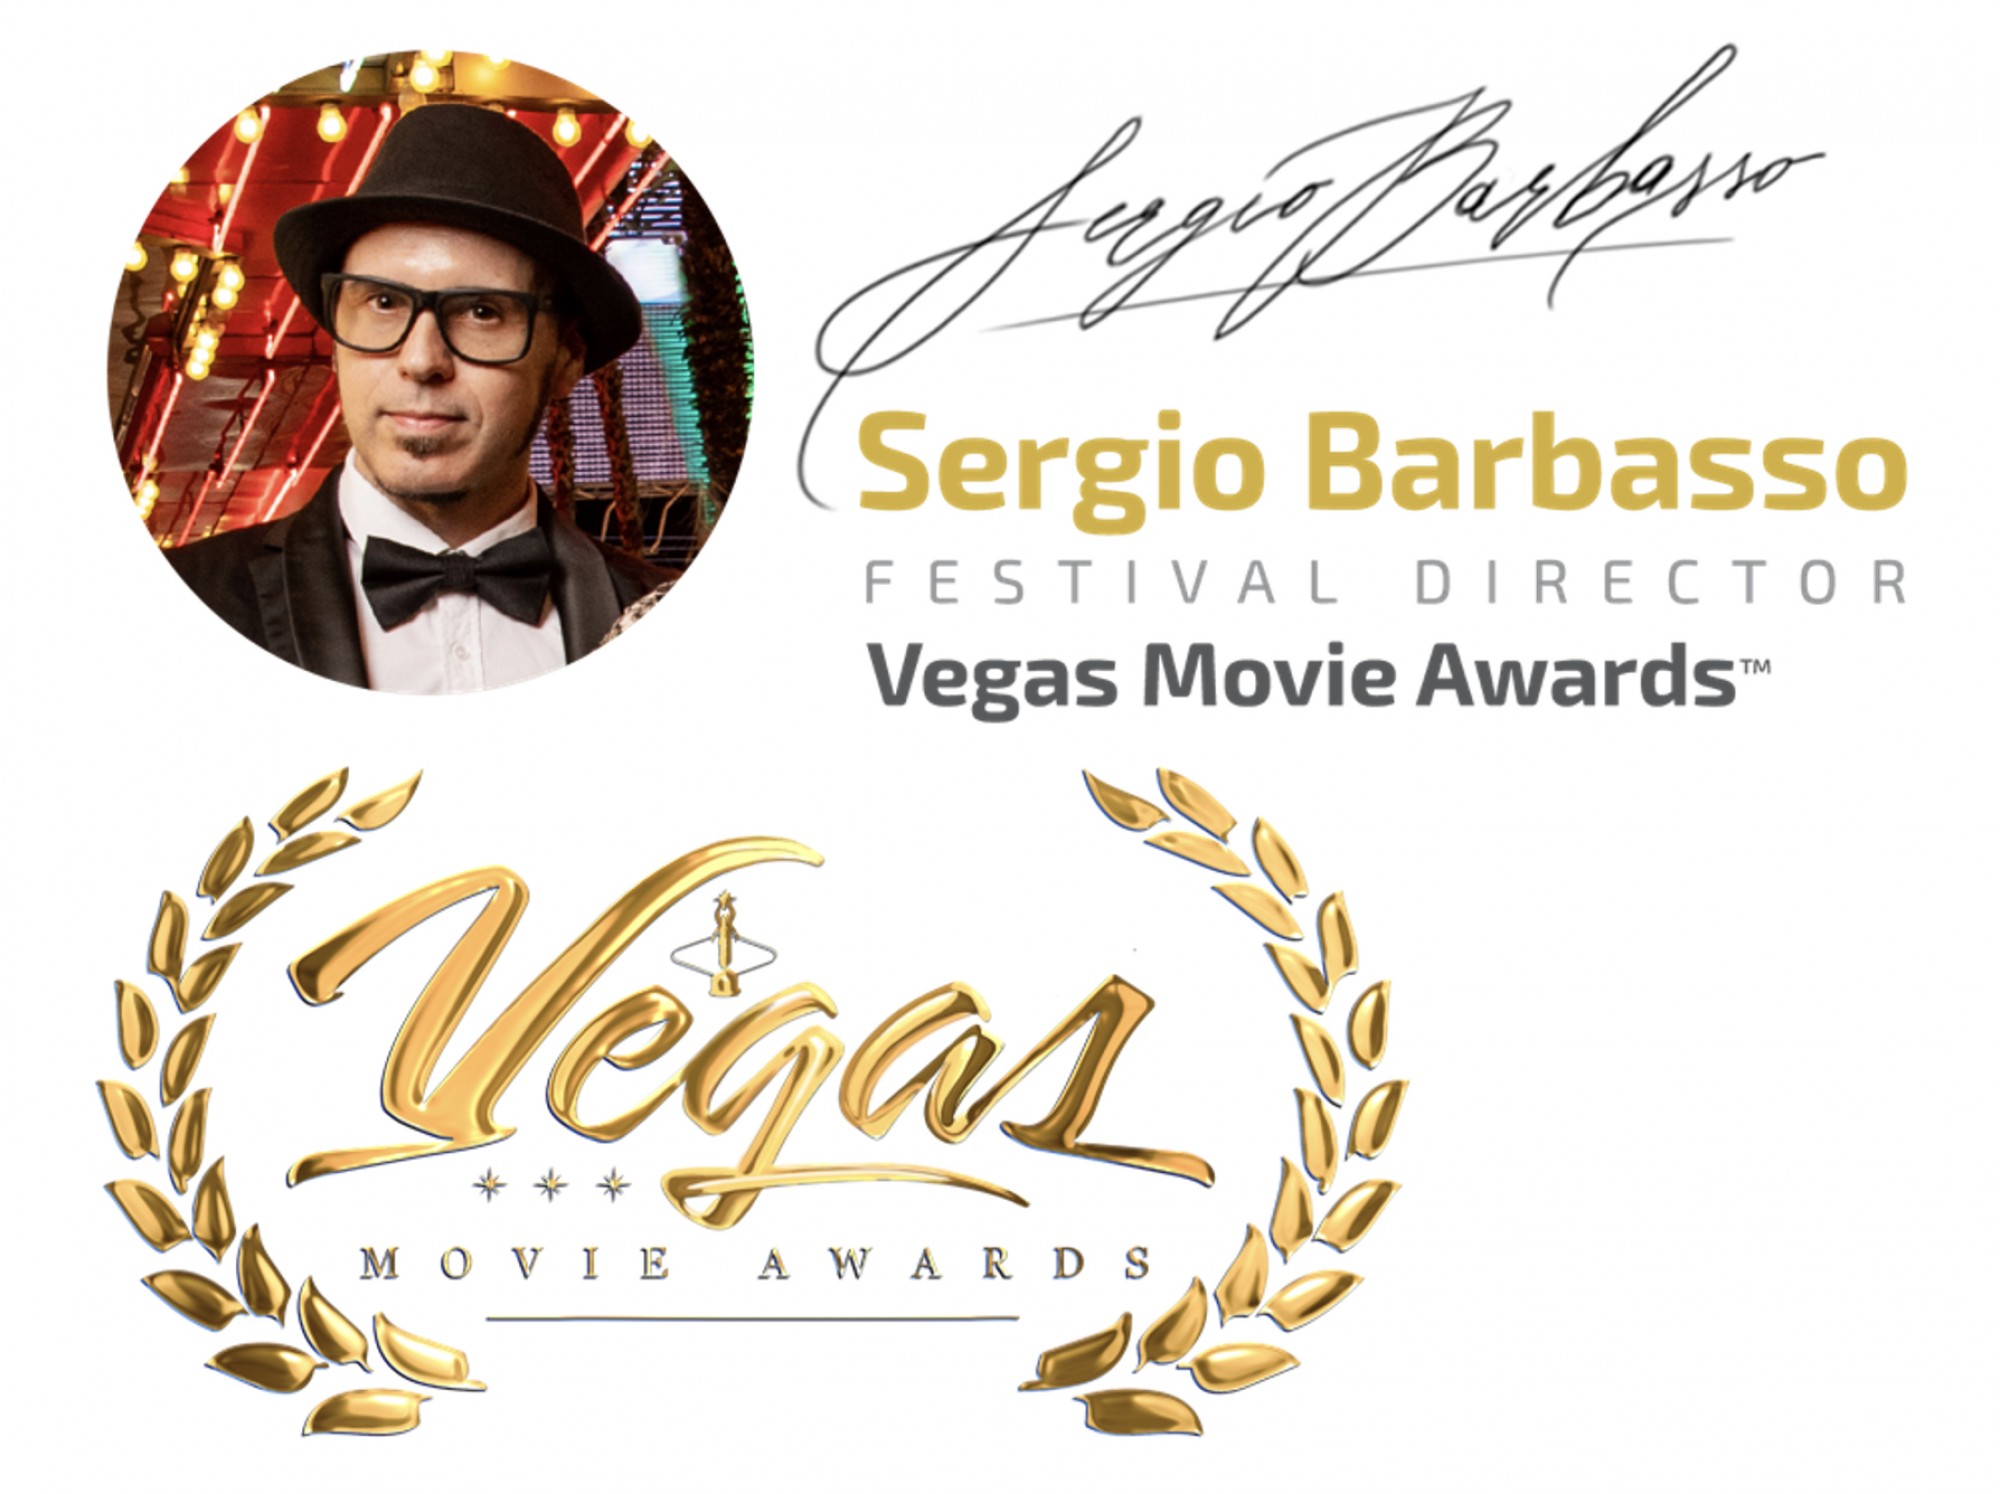 Mail from Sergio Barbasso, Festival Director of the Vegas Movie Awards